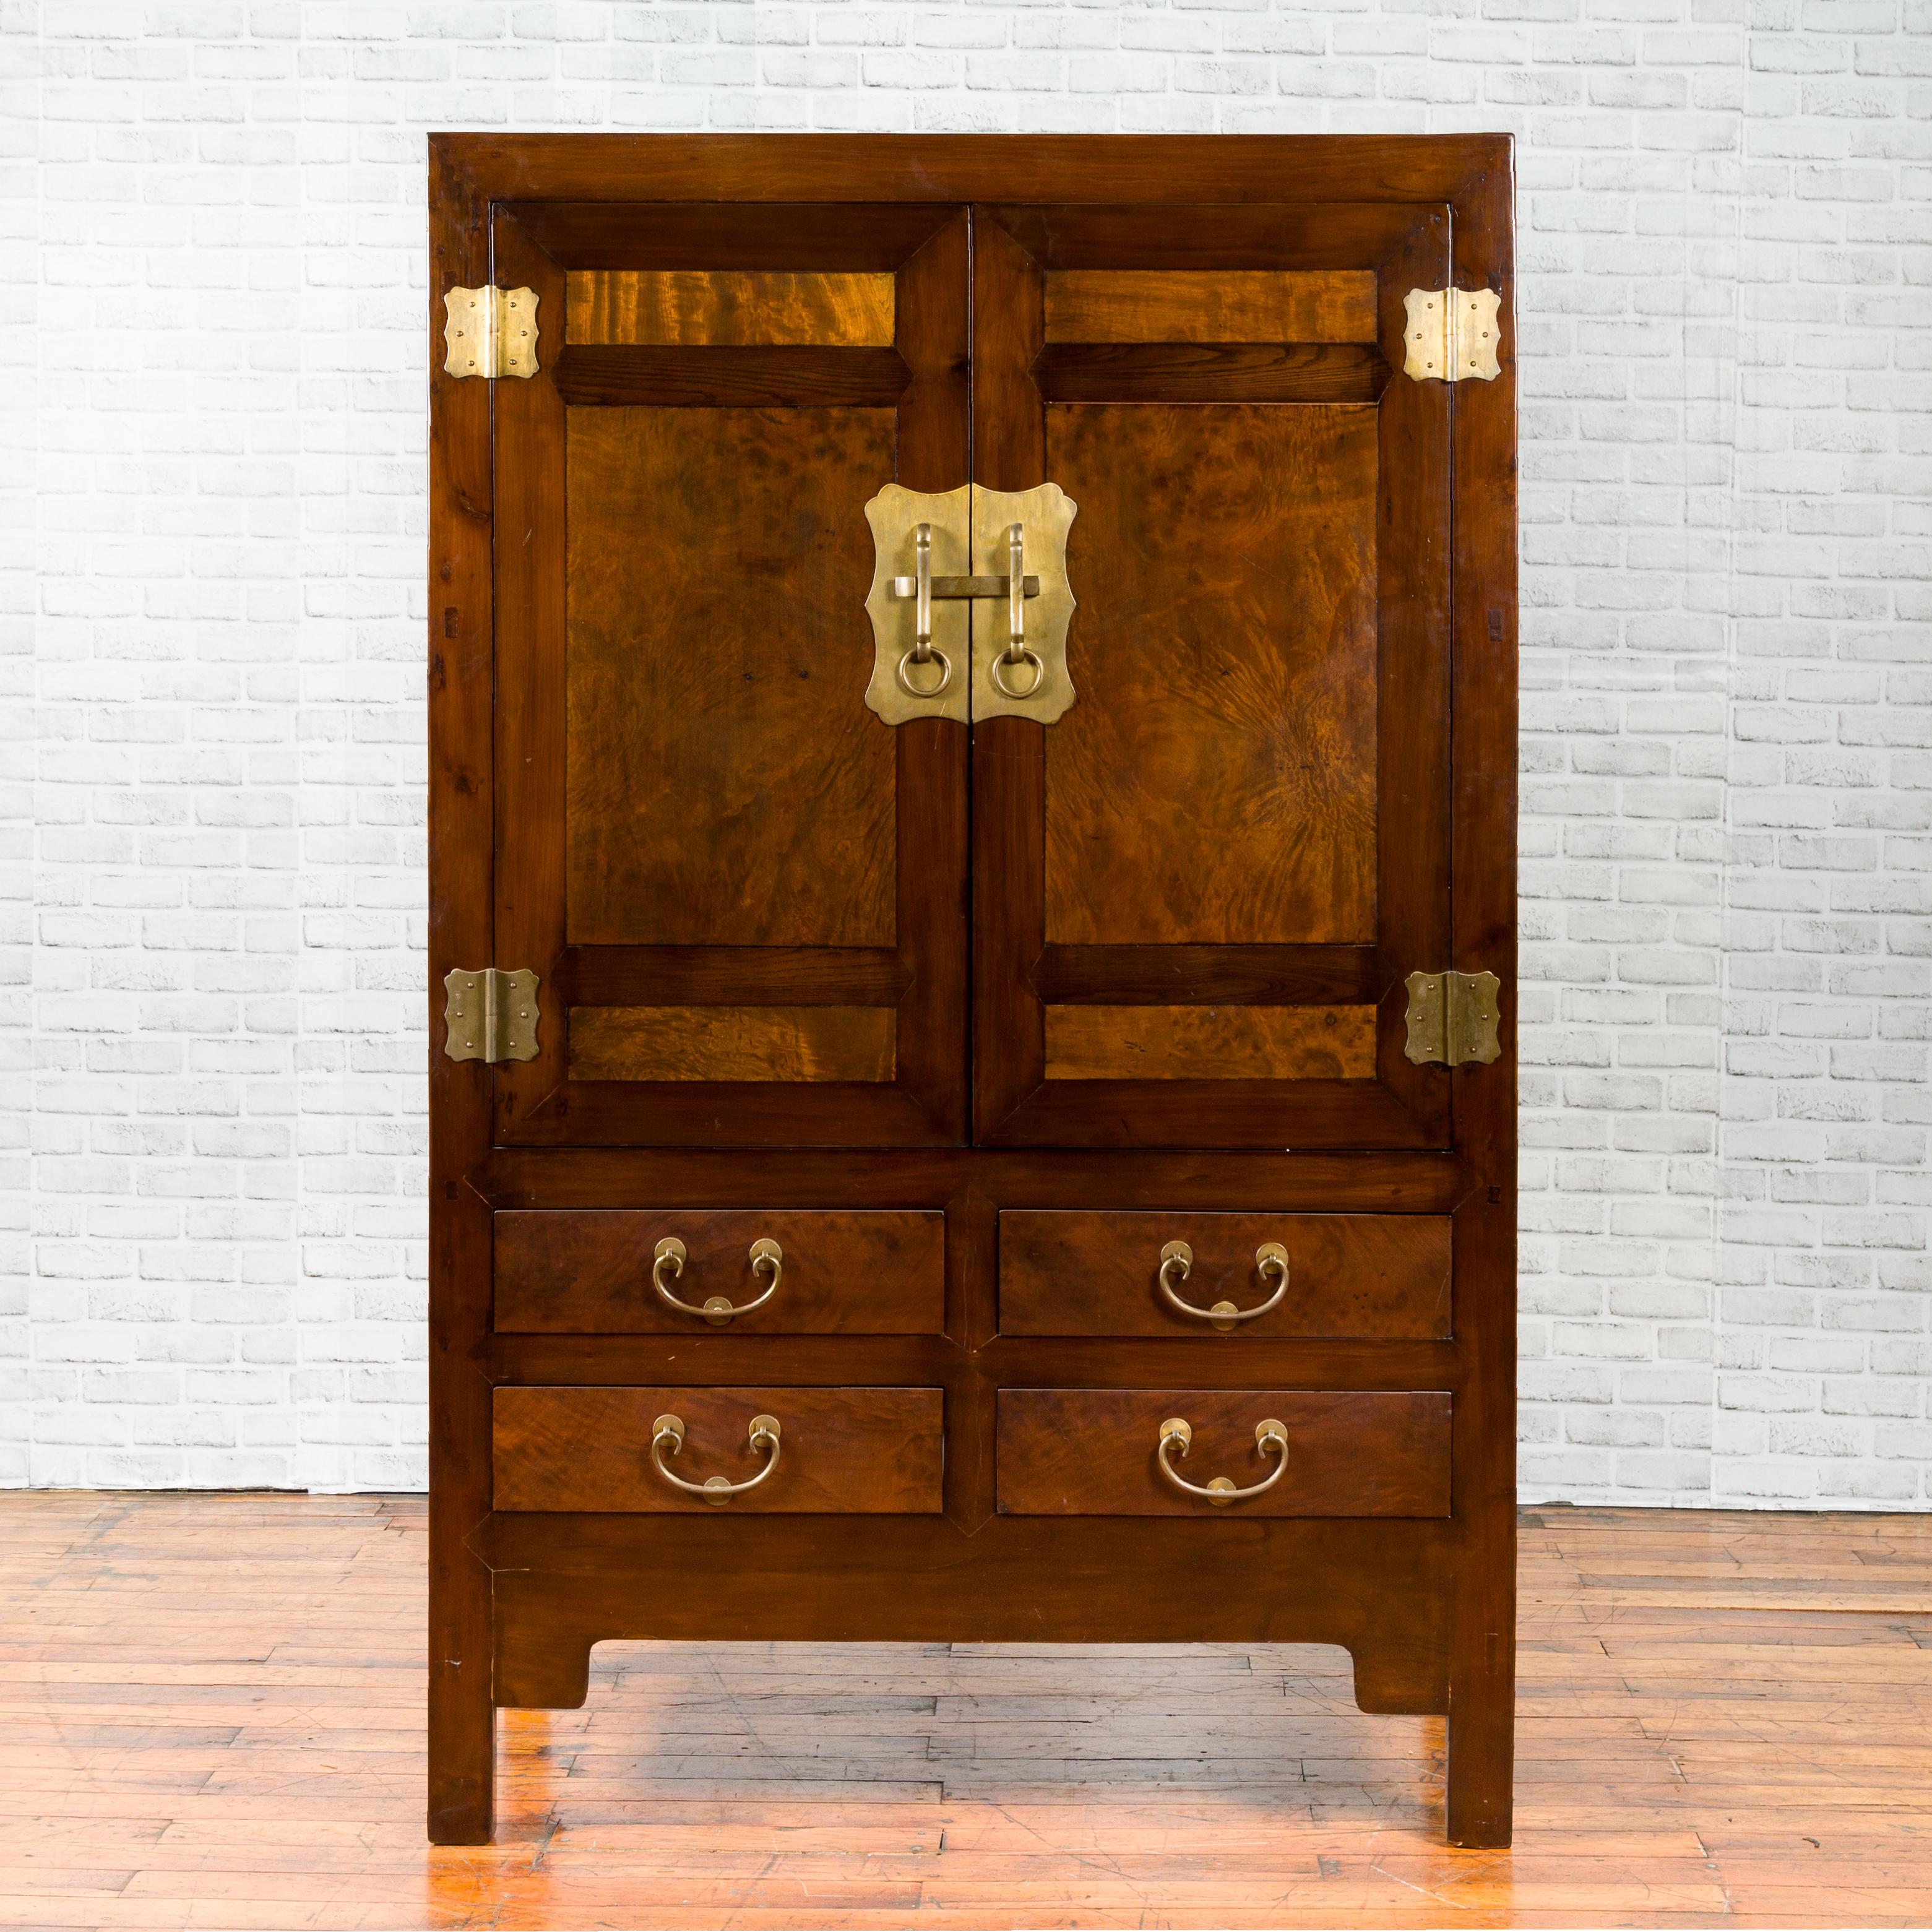 A Northern Chinese elm and burl wood cabinet from the early 20th century, with newer brass hardware, two doors and drawers. Created in Hebei during the first quarter of the 20th century, this two-toned cabinet features two doors with burl accents